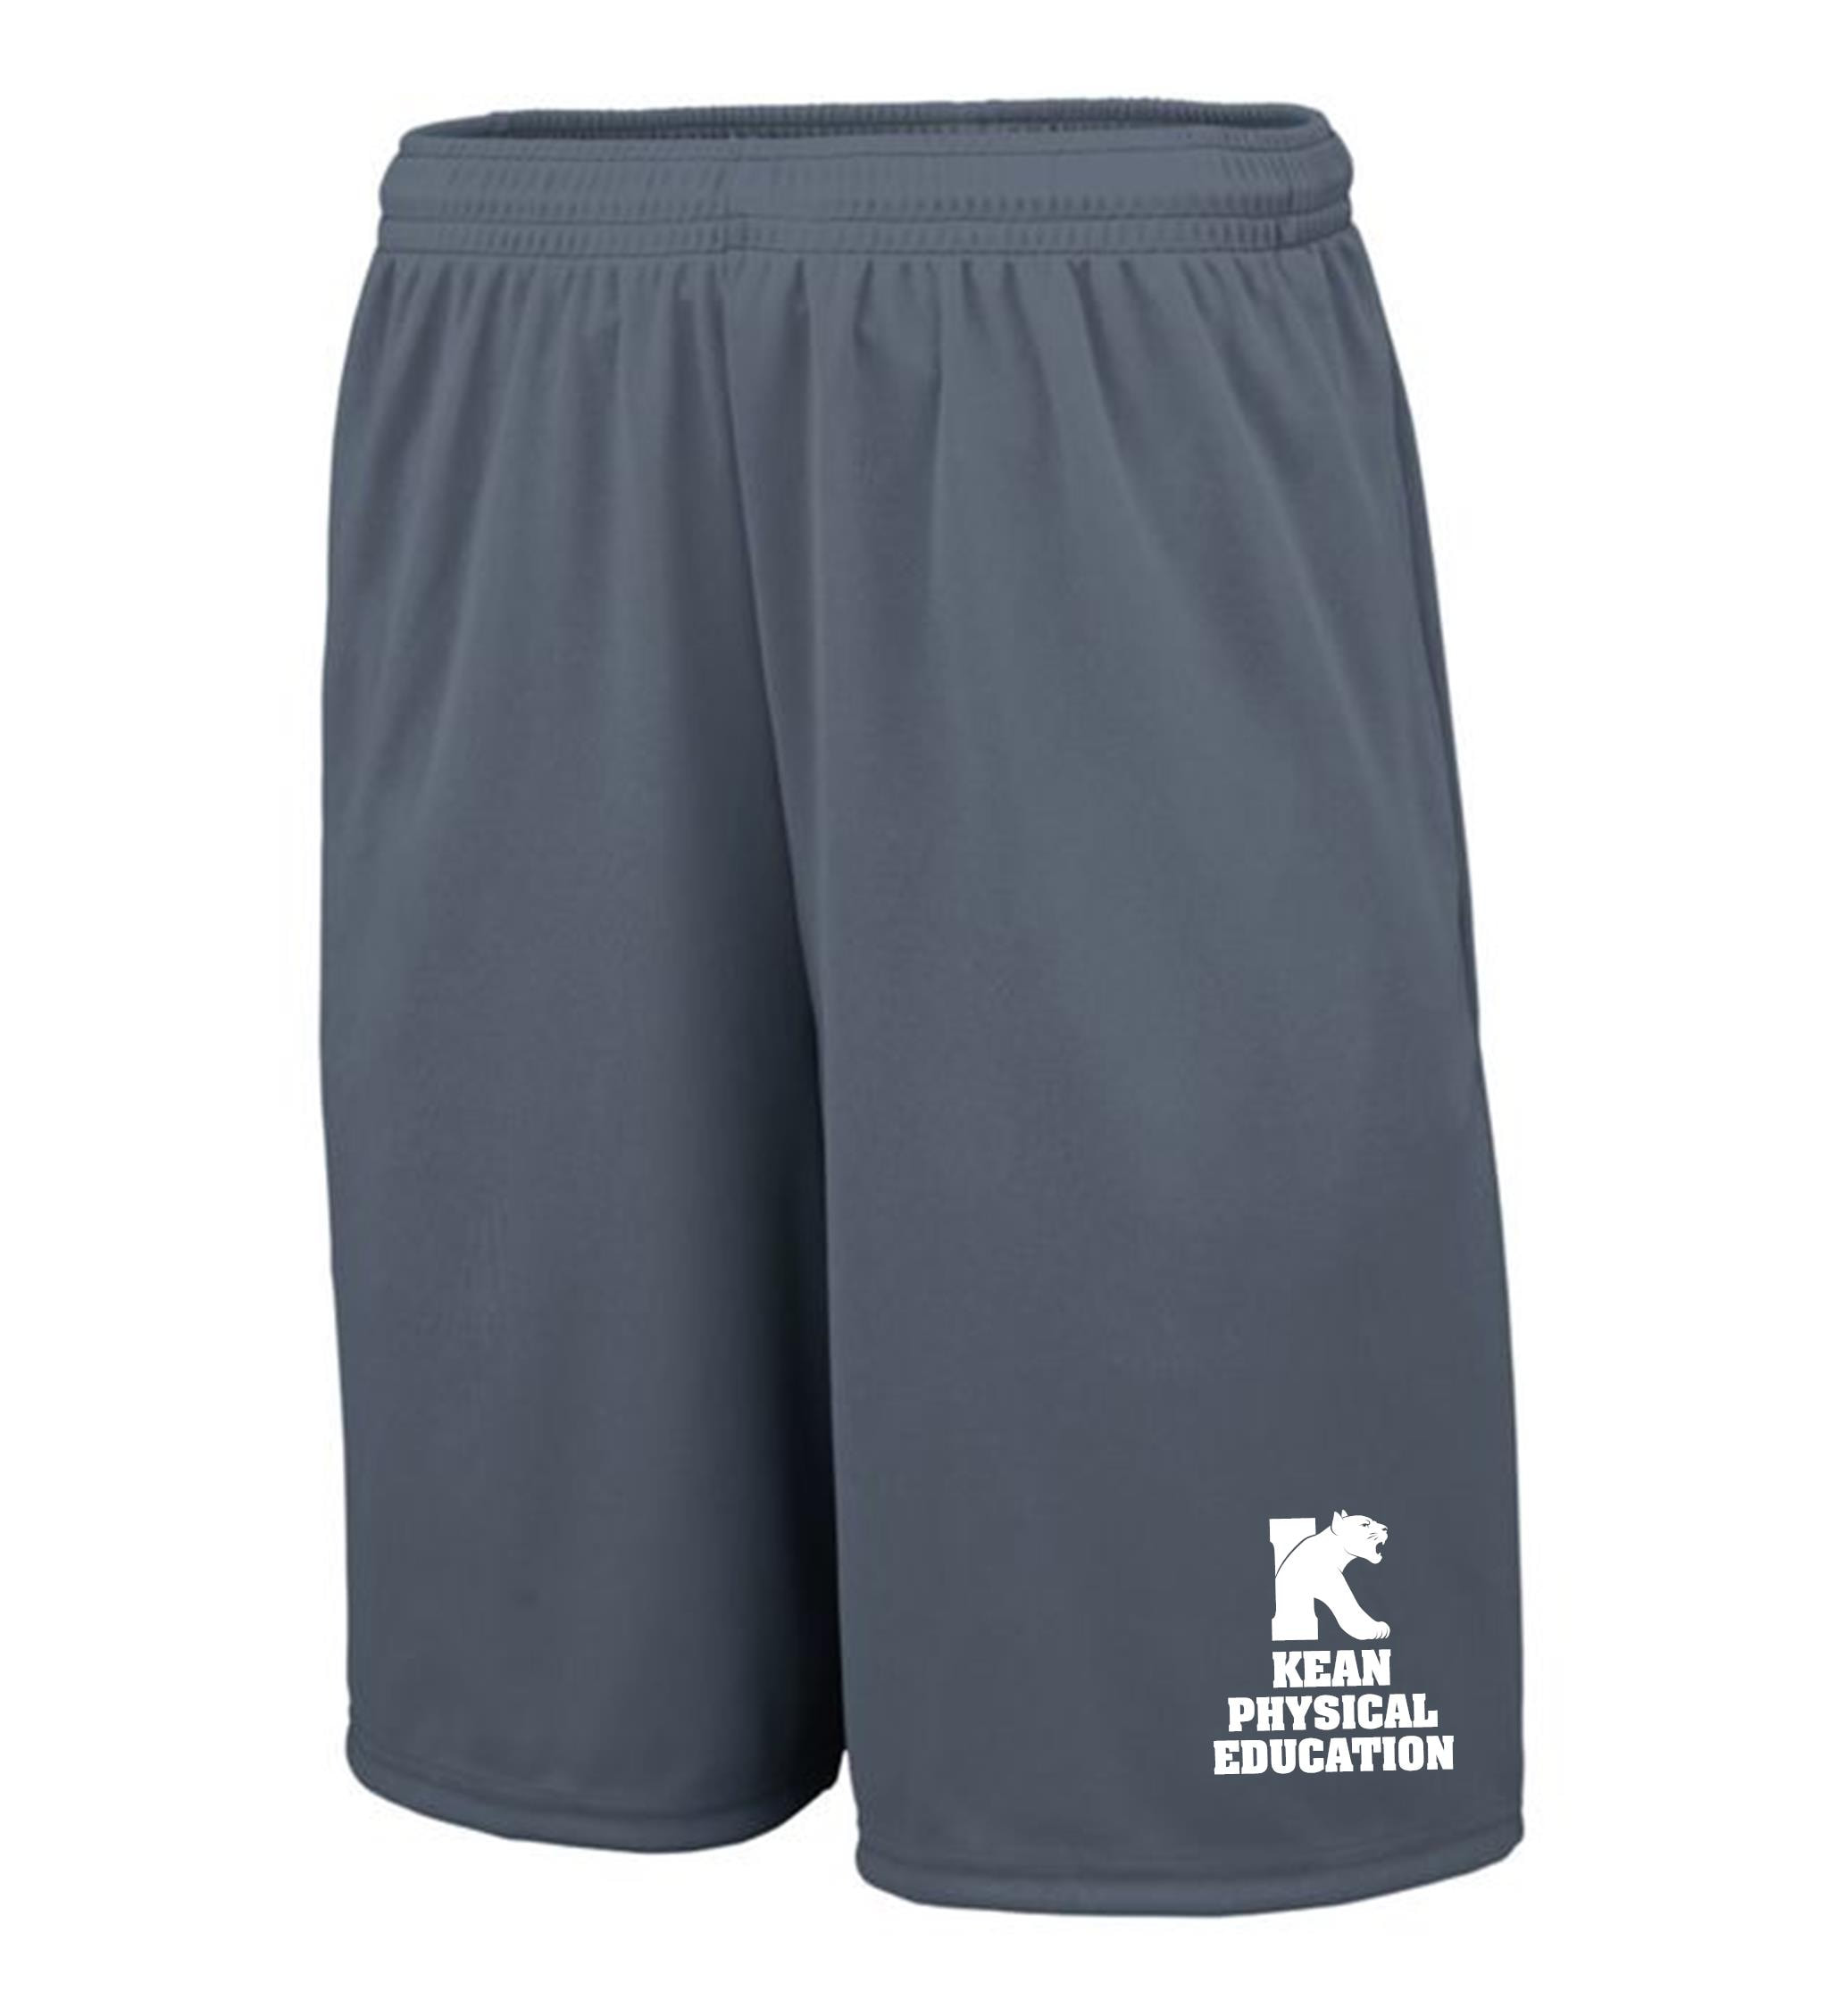 KEAN TRAINING SHORTS WITH POCKETS Style # 1428